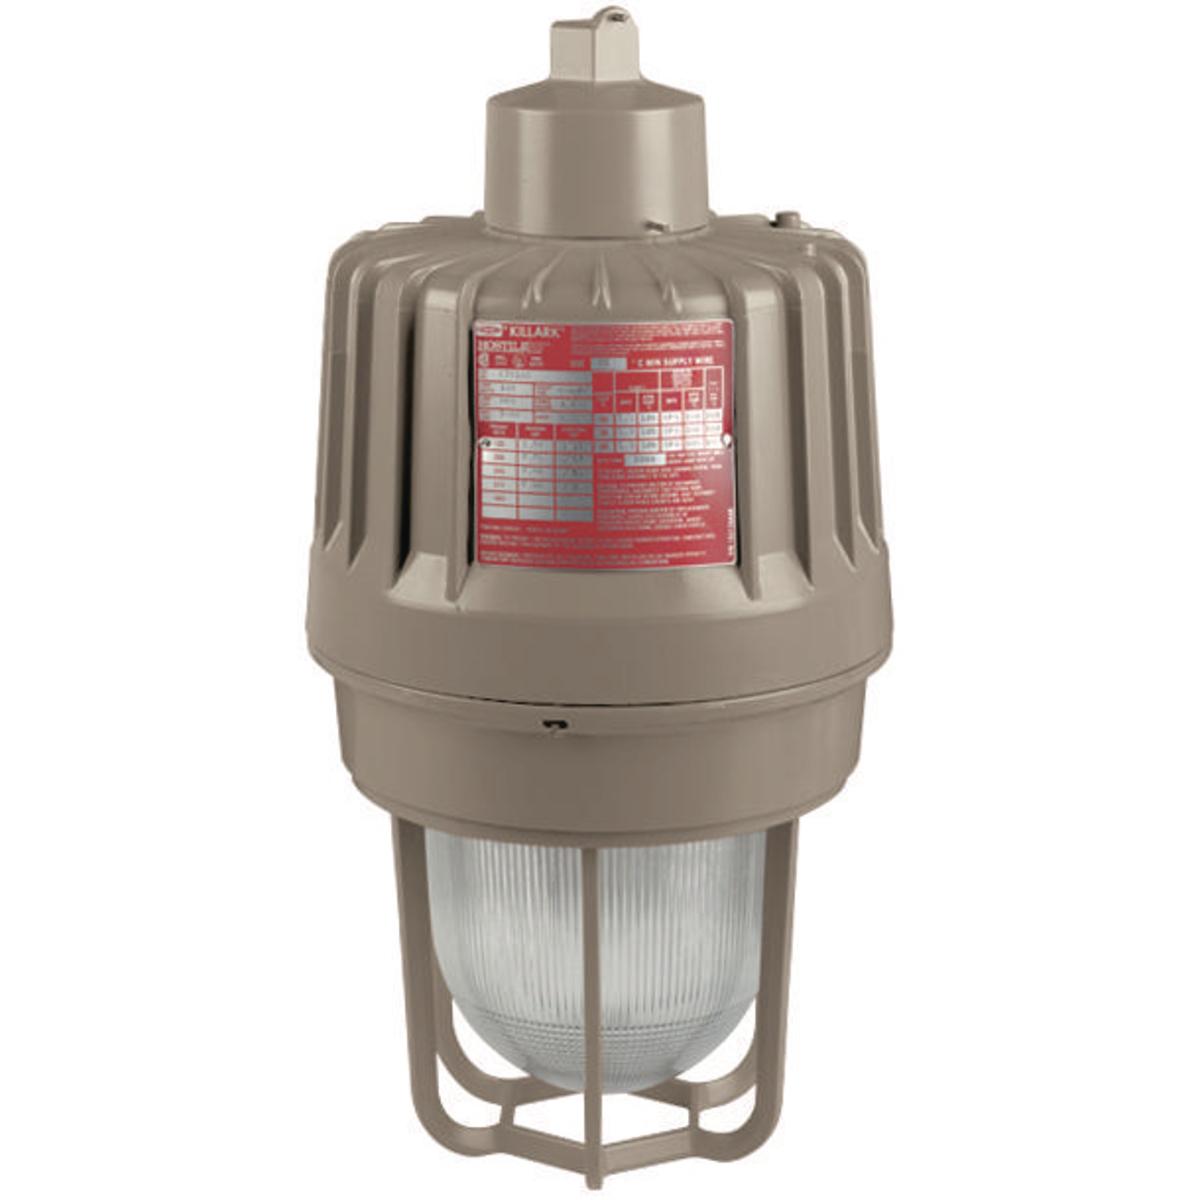 Hubbell EZP255A2G PULSE 250W 480V Pulse-Start Metal Halide 3/4" Pendant with Guard  ; Three light sources – High Pressure Sodium (50-400W), Metal Halide (70-400W) and Pulse Start Metal Halide (175-400W) ; Mounting choice –Pendant, ceiling, 25˚ stanchion or 90˚ wall mount, 